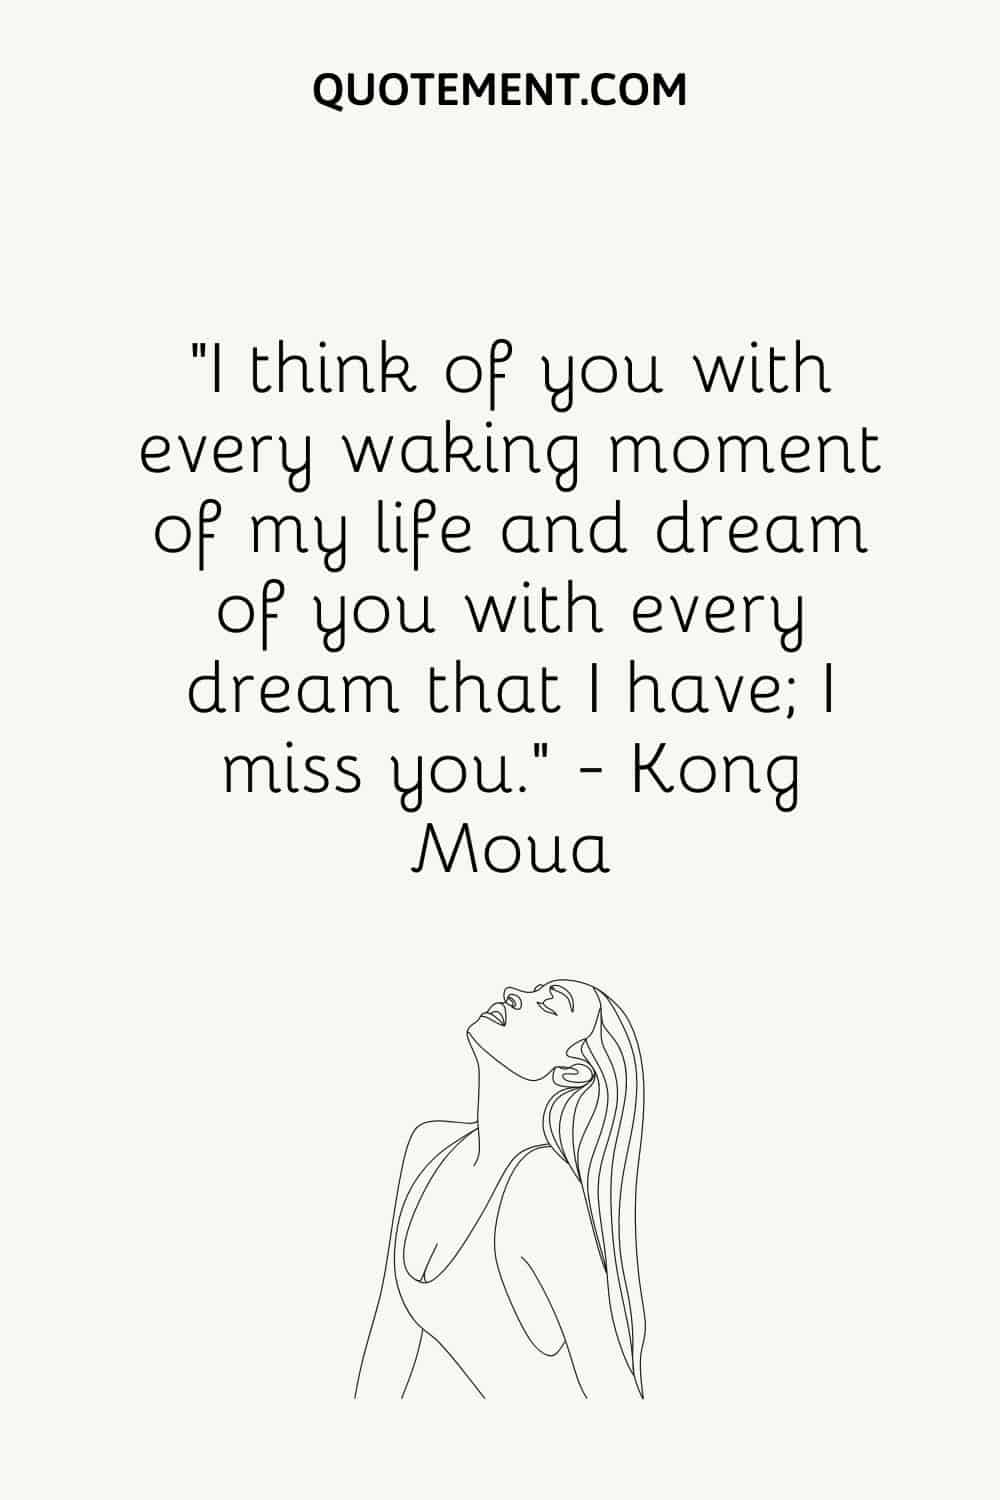 “I think of you with every waking moment of my life and dream of you with every dream that I have; I miss you.” — Kong Moua